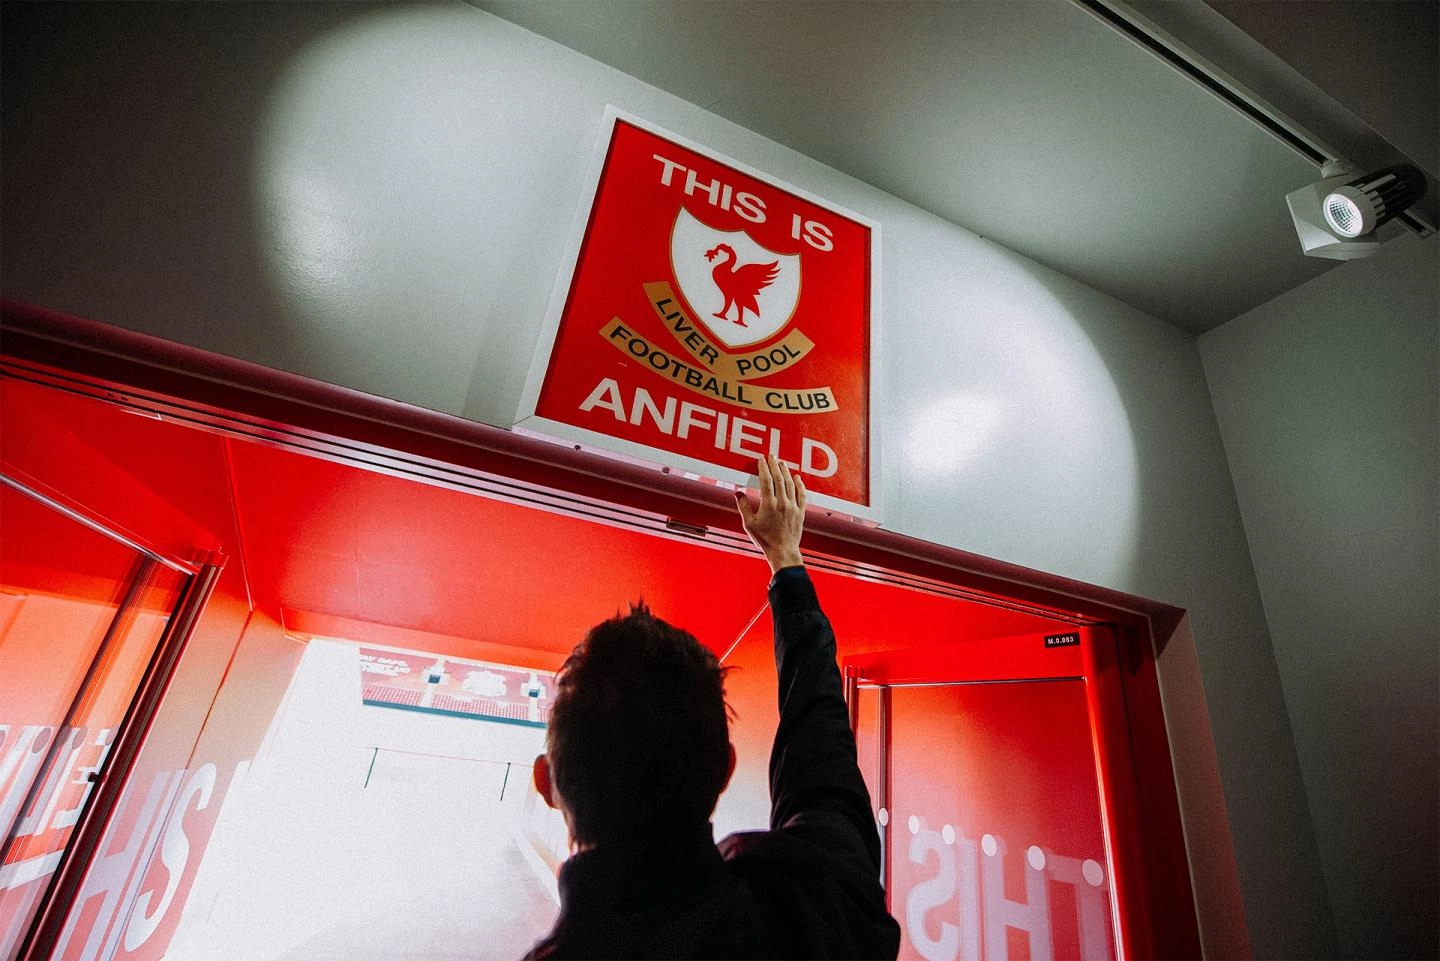 Person reaching up and touching the This is Anfield sign with his hand